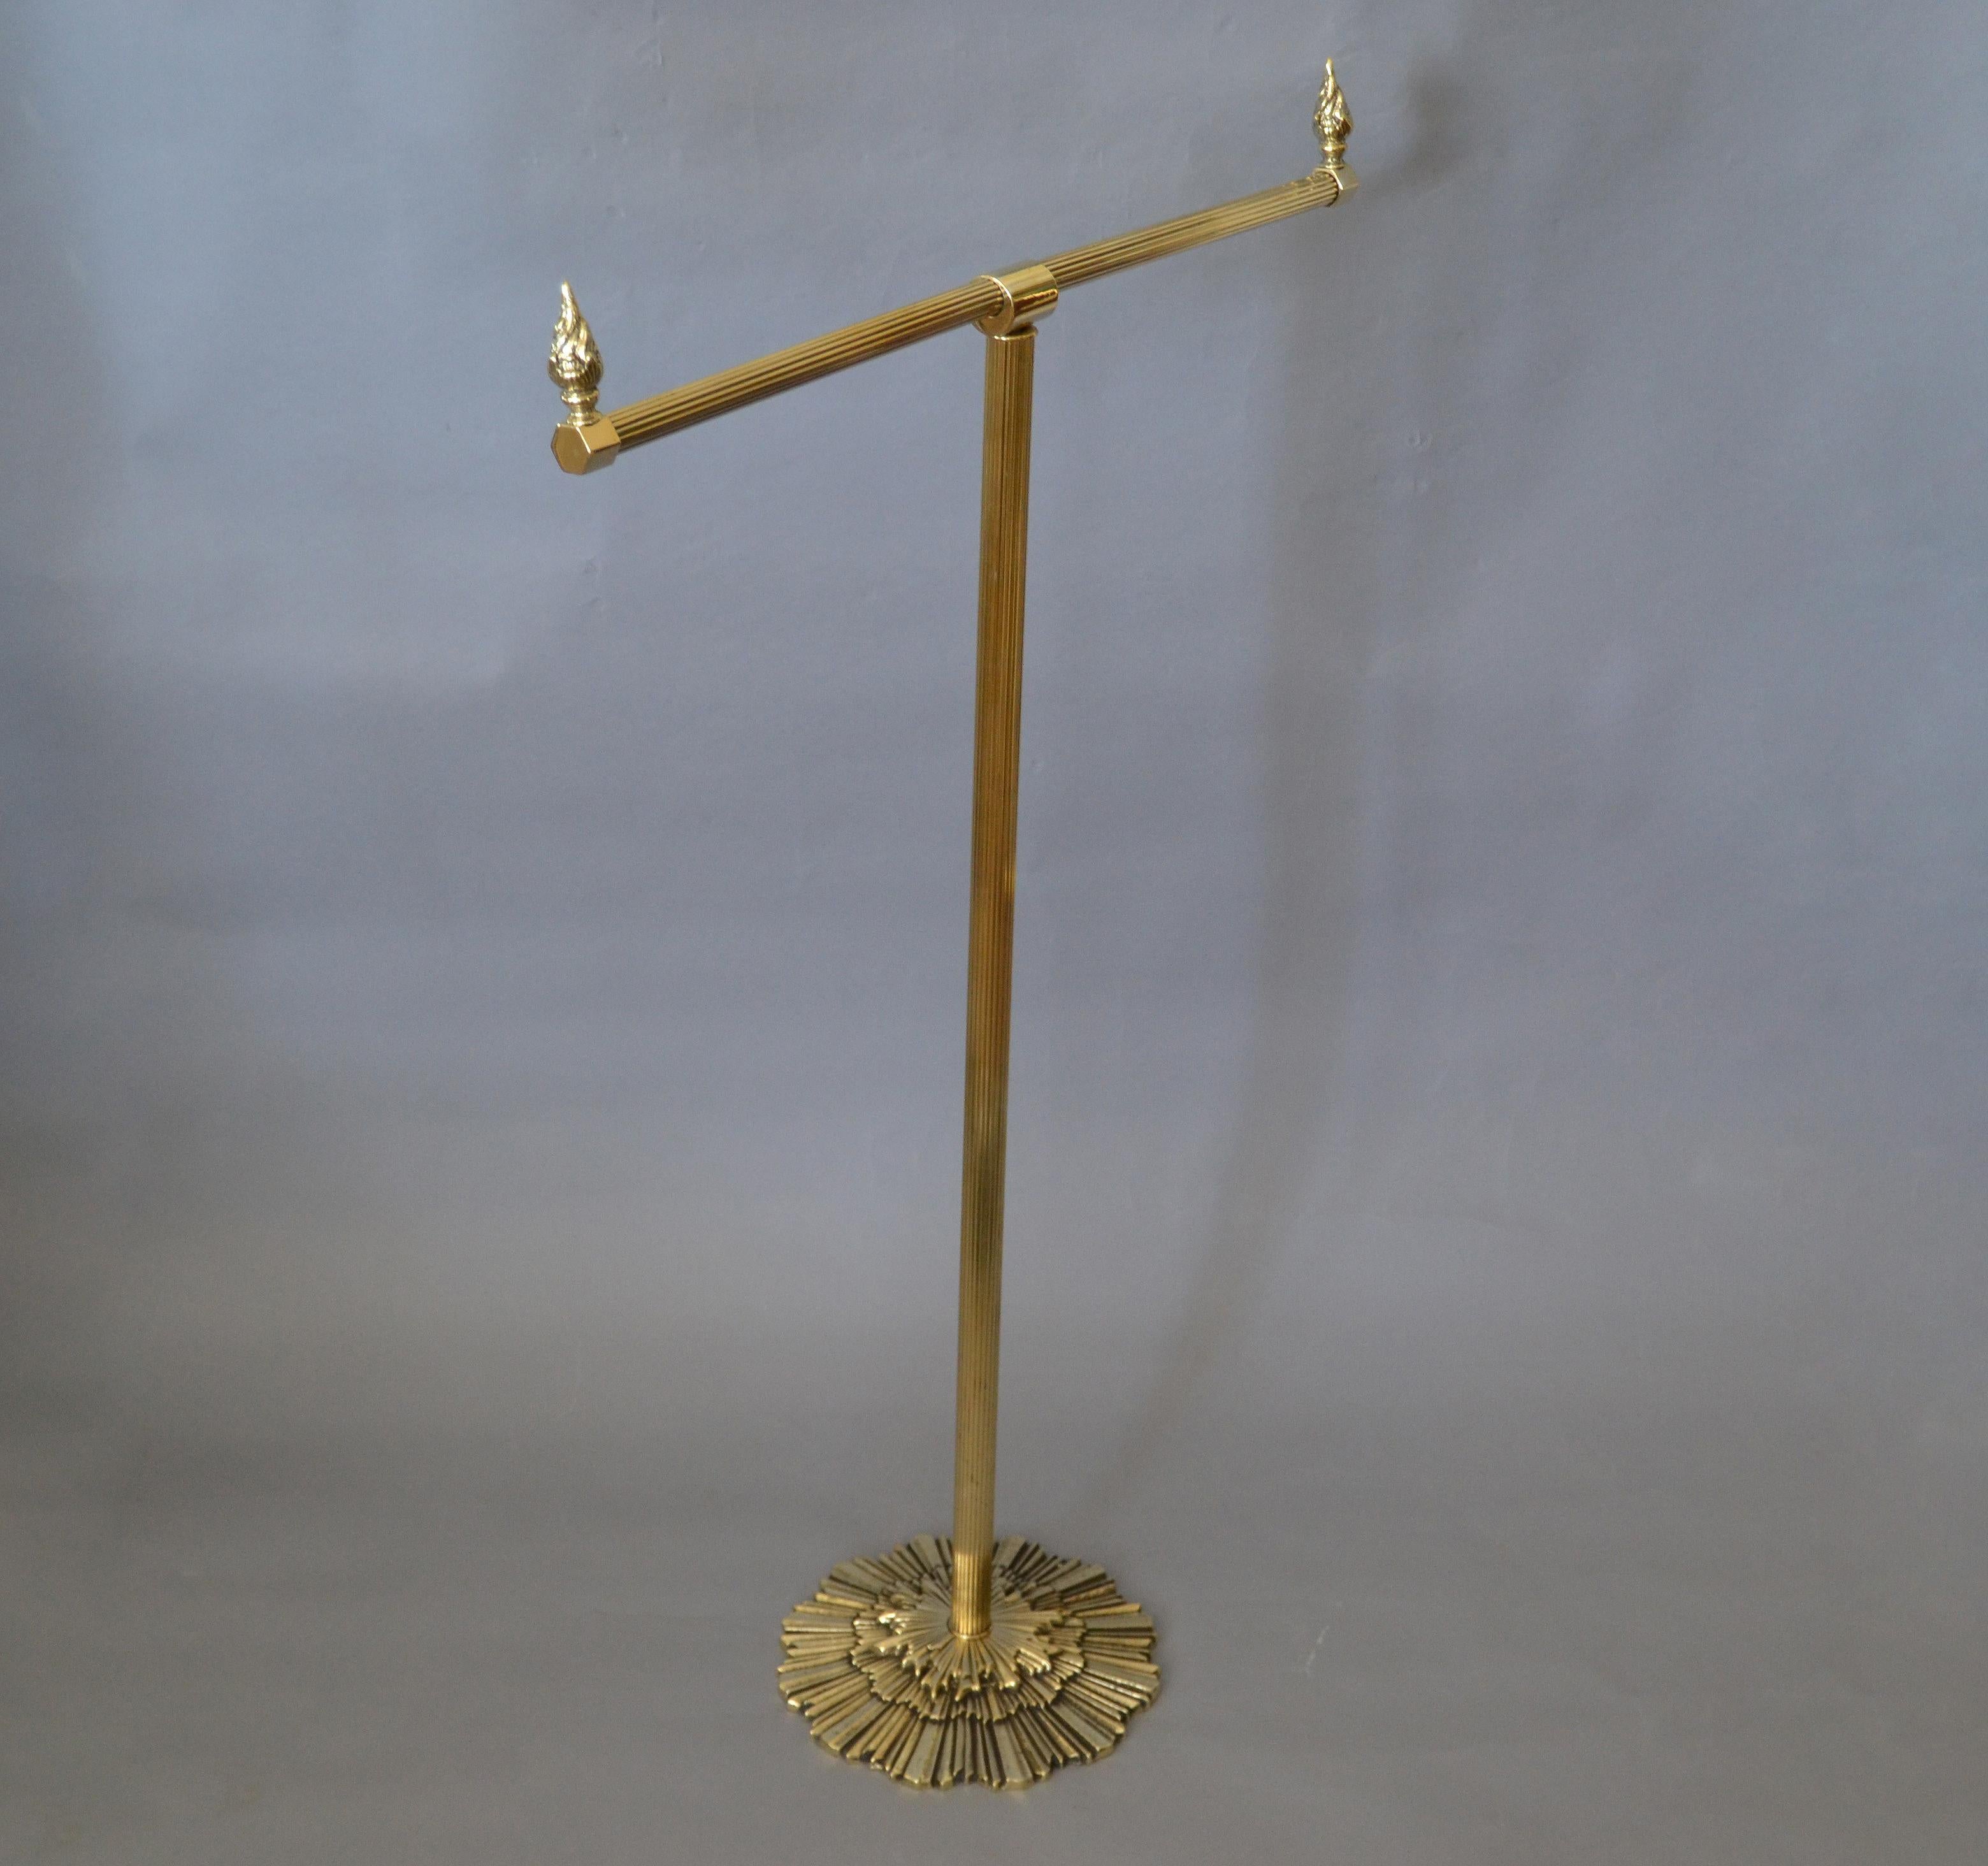 Antique British Colonial bronze pedestal rack, stand for towels or bedspreads.
Made in England.
The bronze finish is freshly polished and is durable for years to come.
  